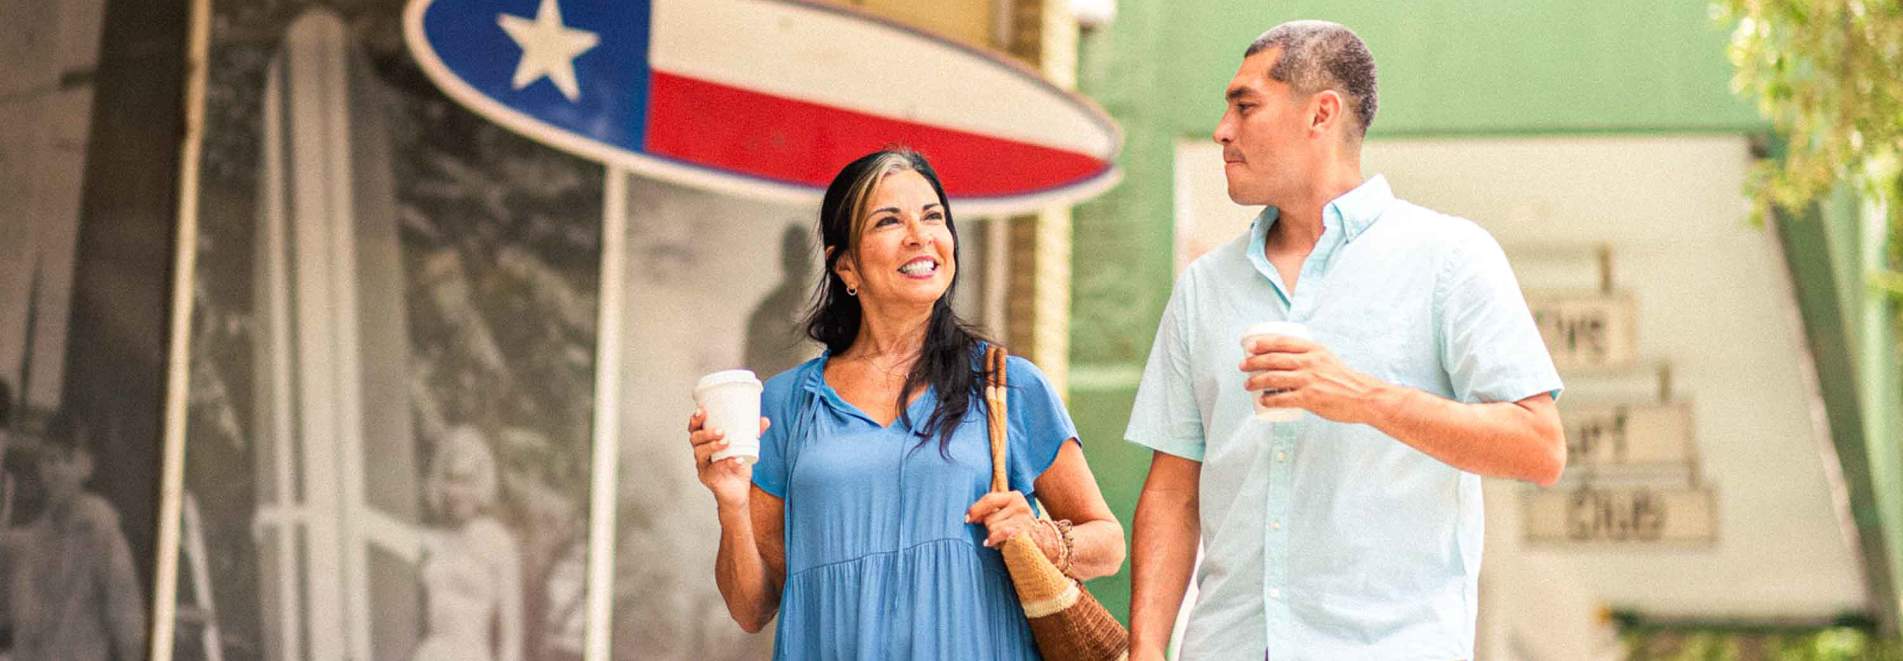 Couple with coffee in Texas by K2 Productions Photography